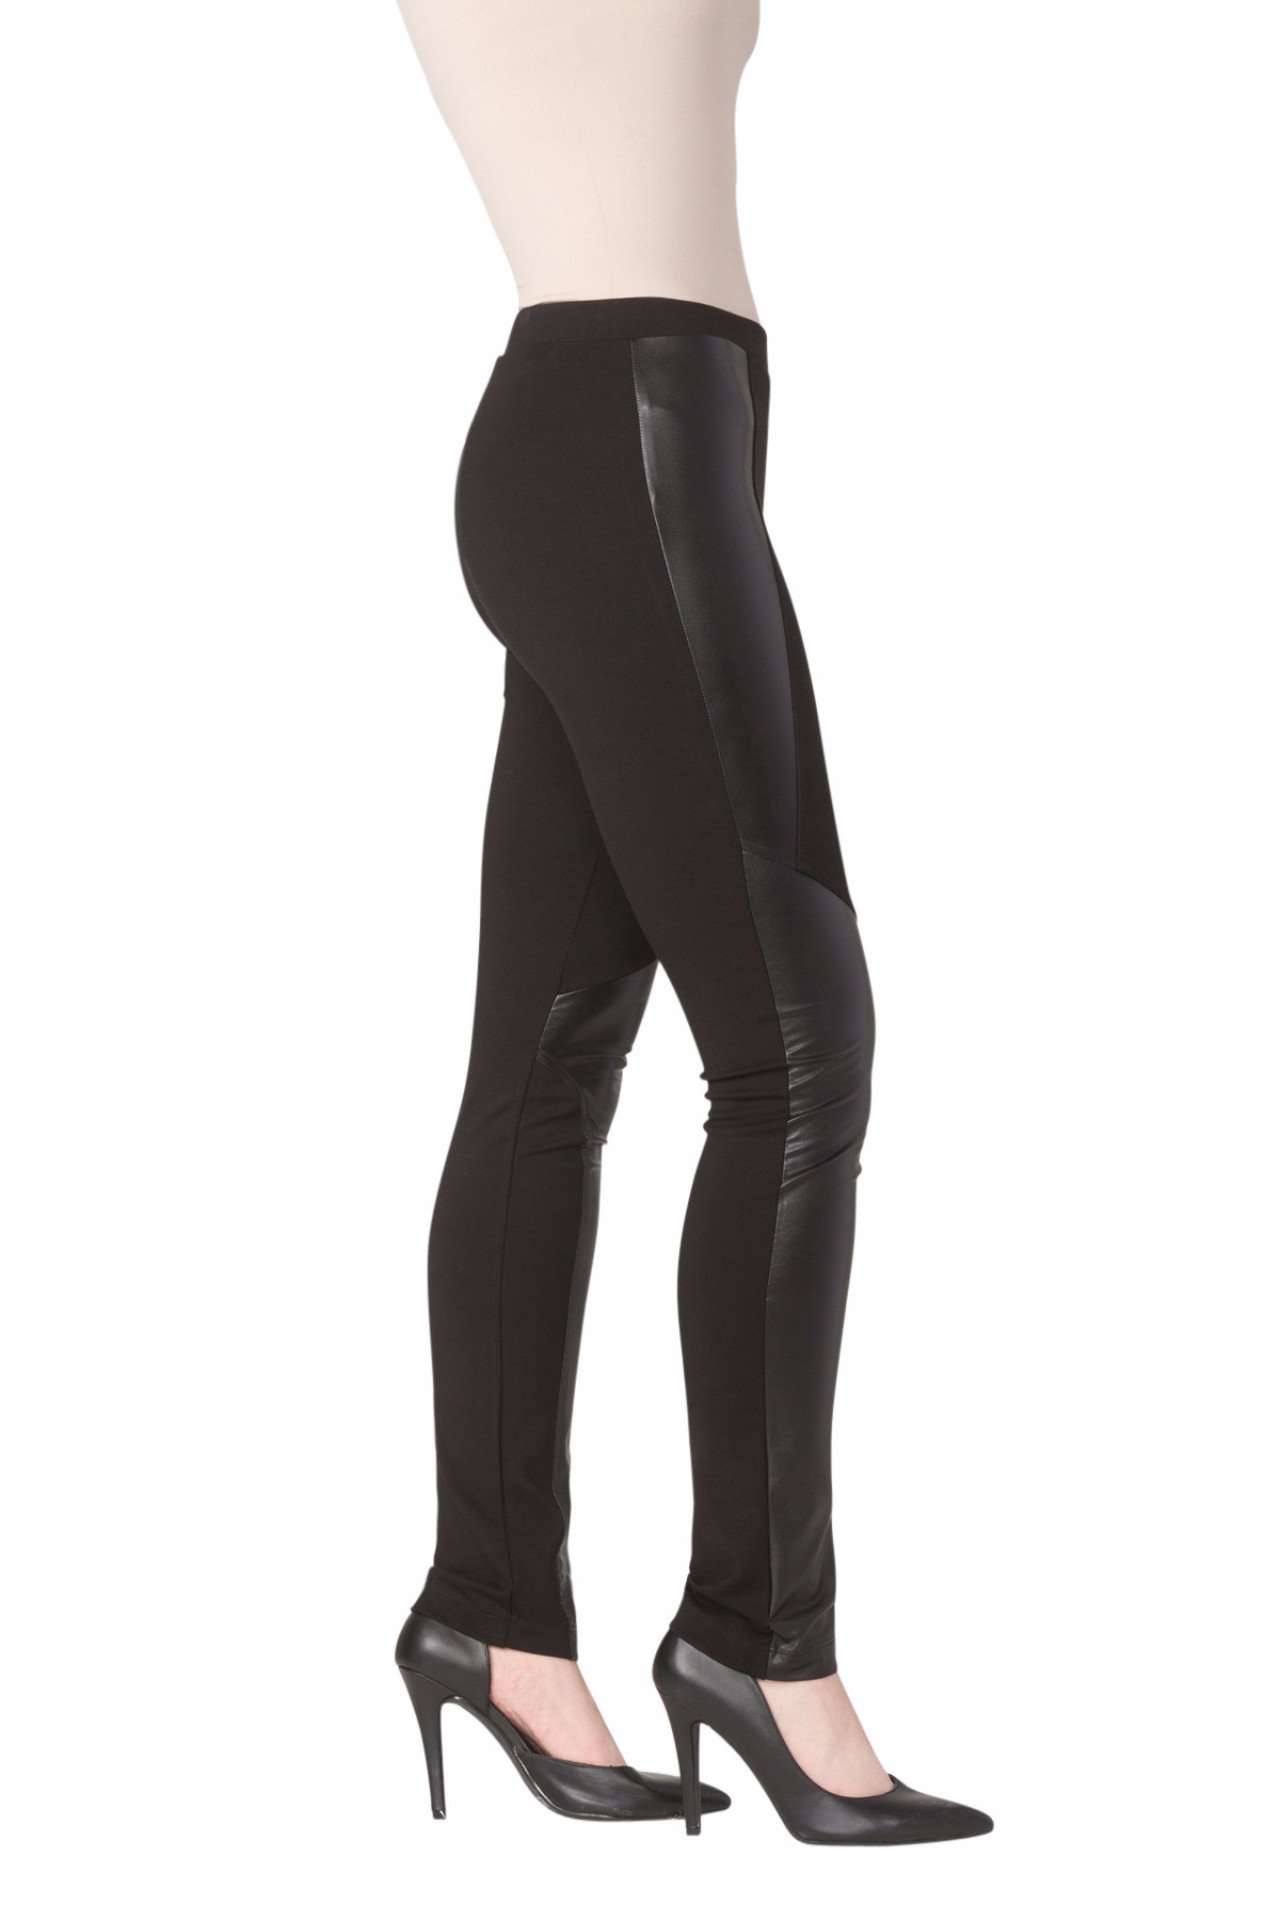 Women's Pants Black Leather Side Detail Quality Stretch Fabric Made in –  Yvonne Marie